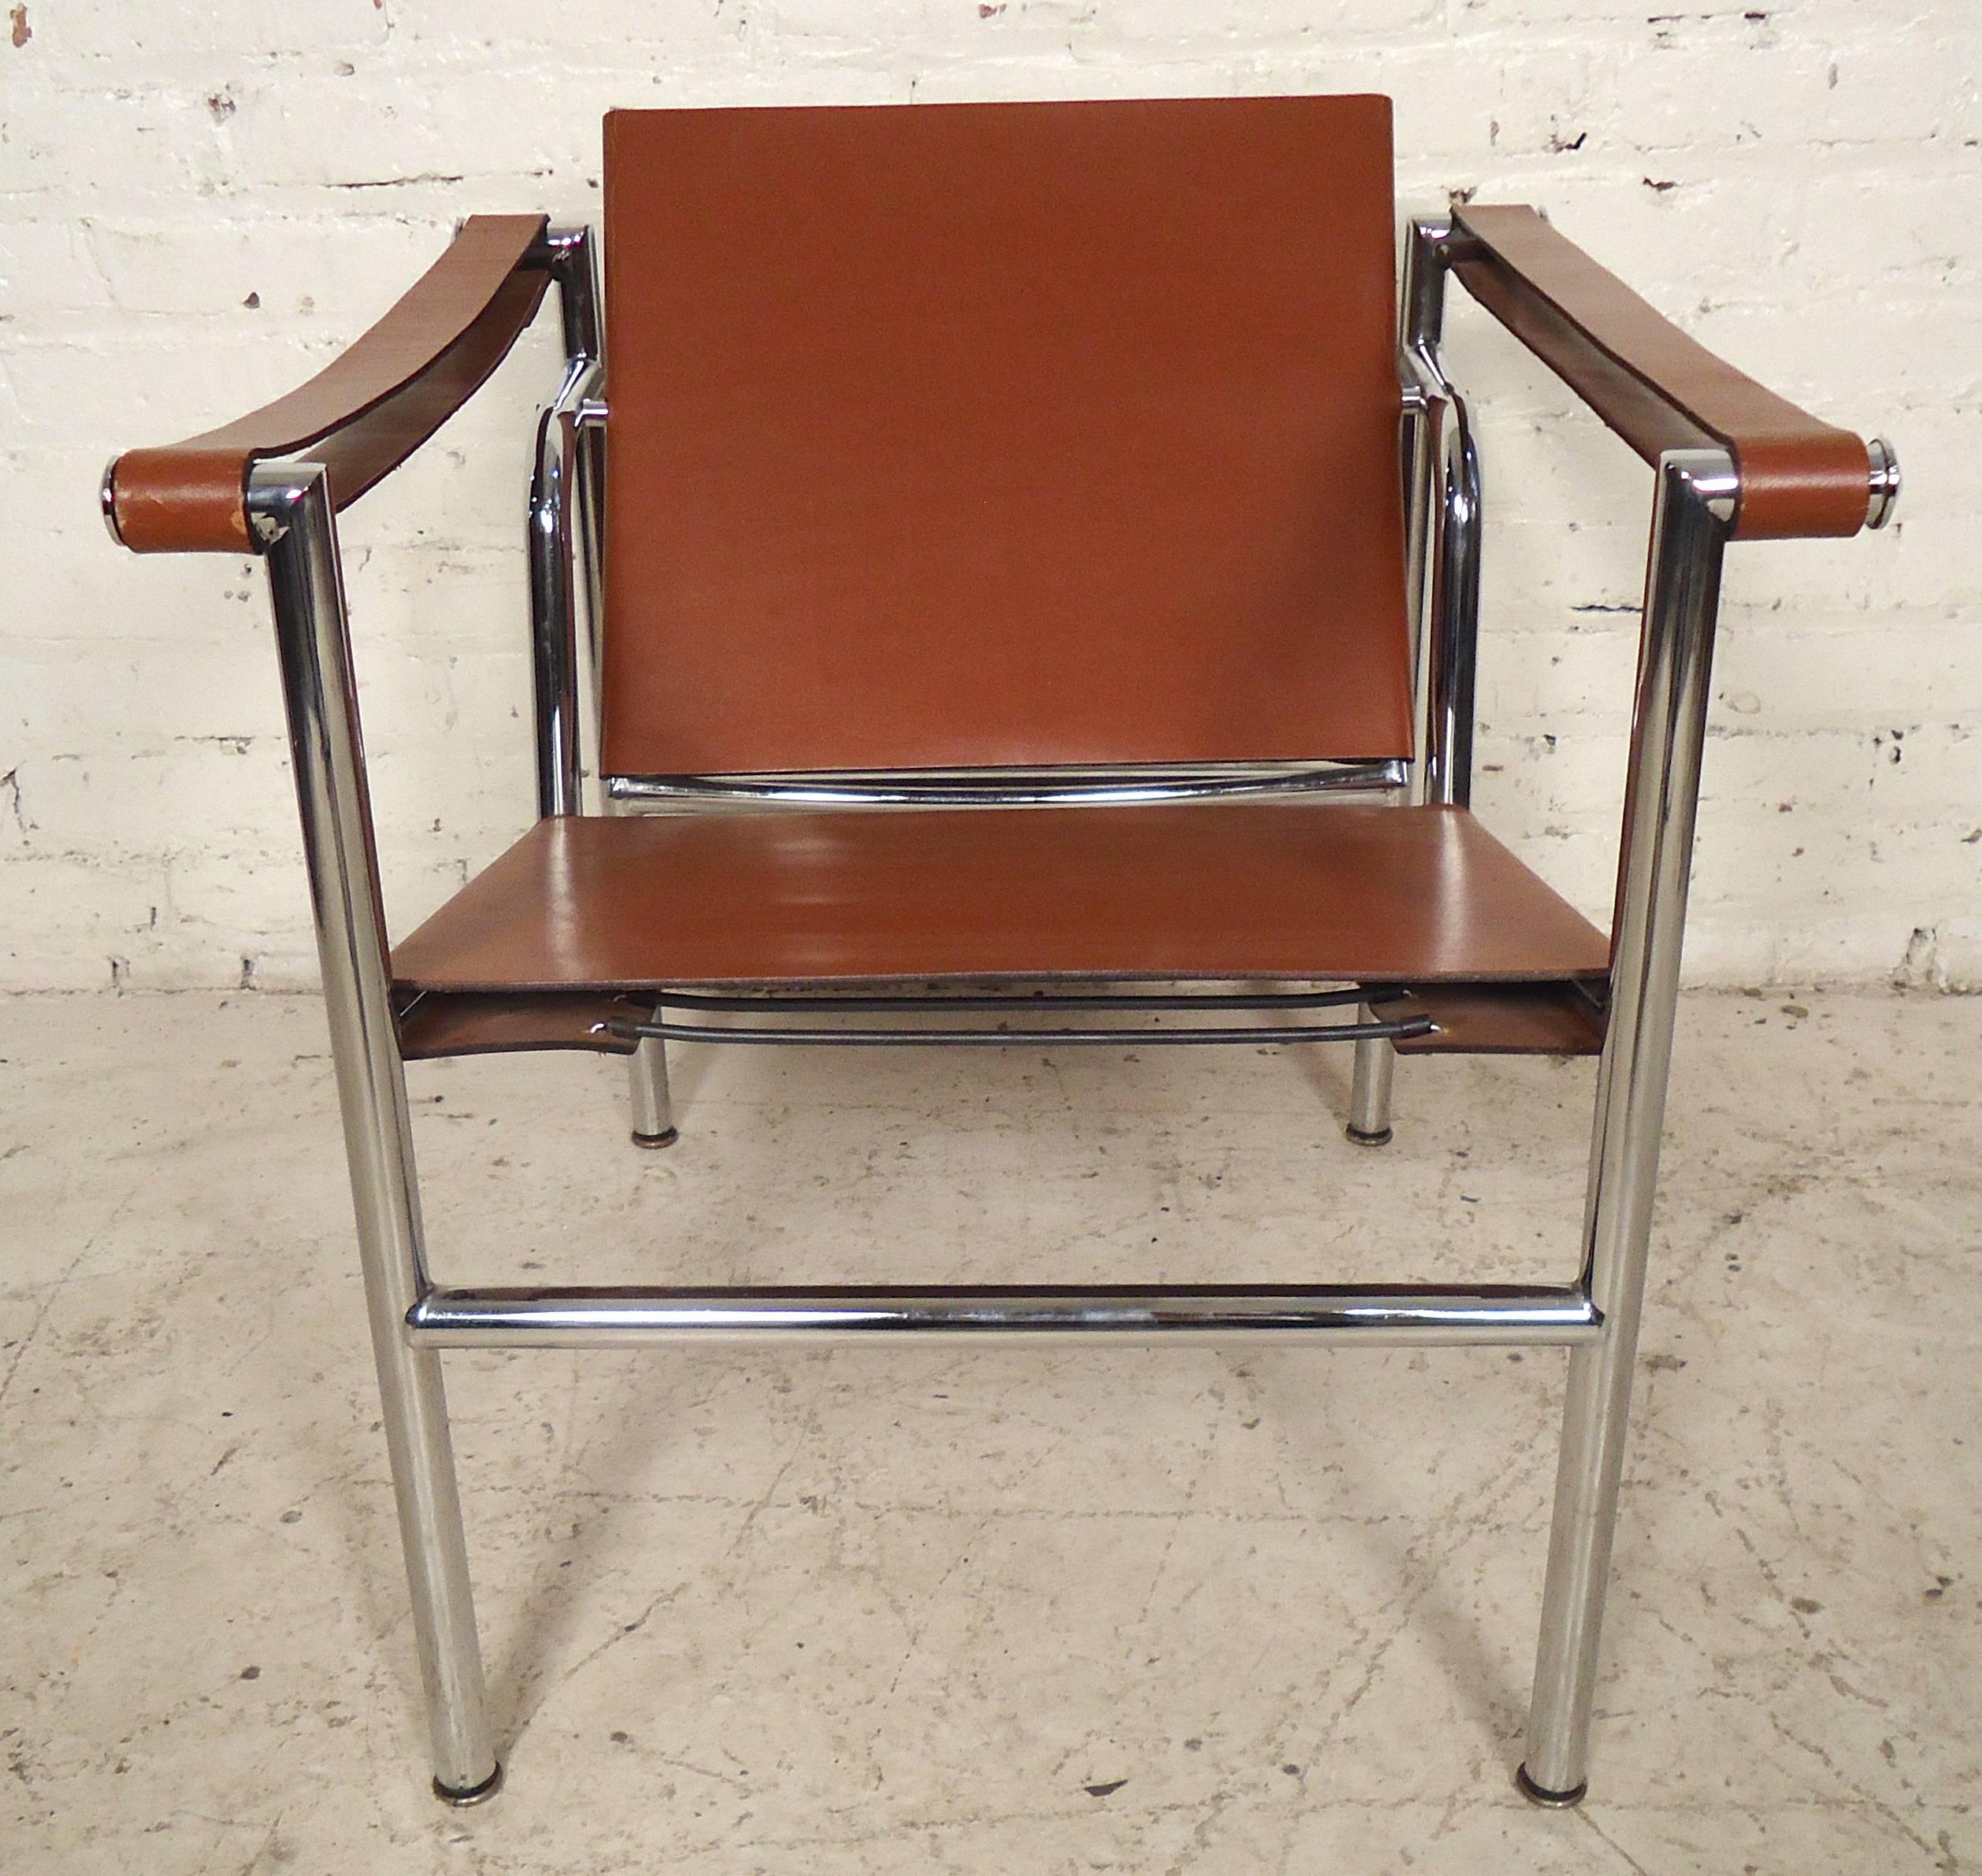 LC1 model chair by Cassina features polished chrome frame and leather. The tilting backrest gives a comfortable seating position.

(Please confirm item location - NY or NJ - with dealer).
 